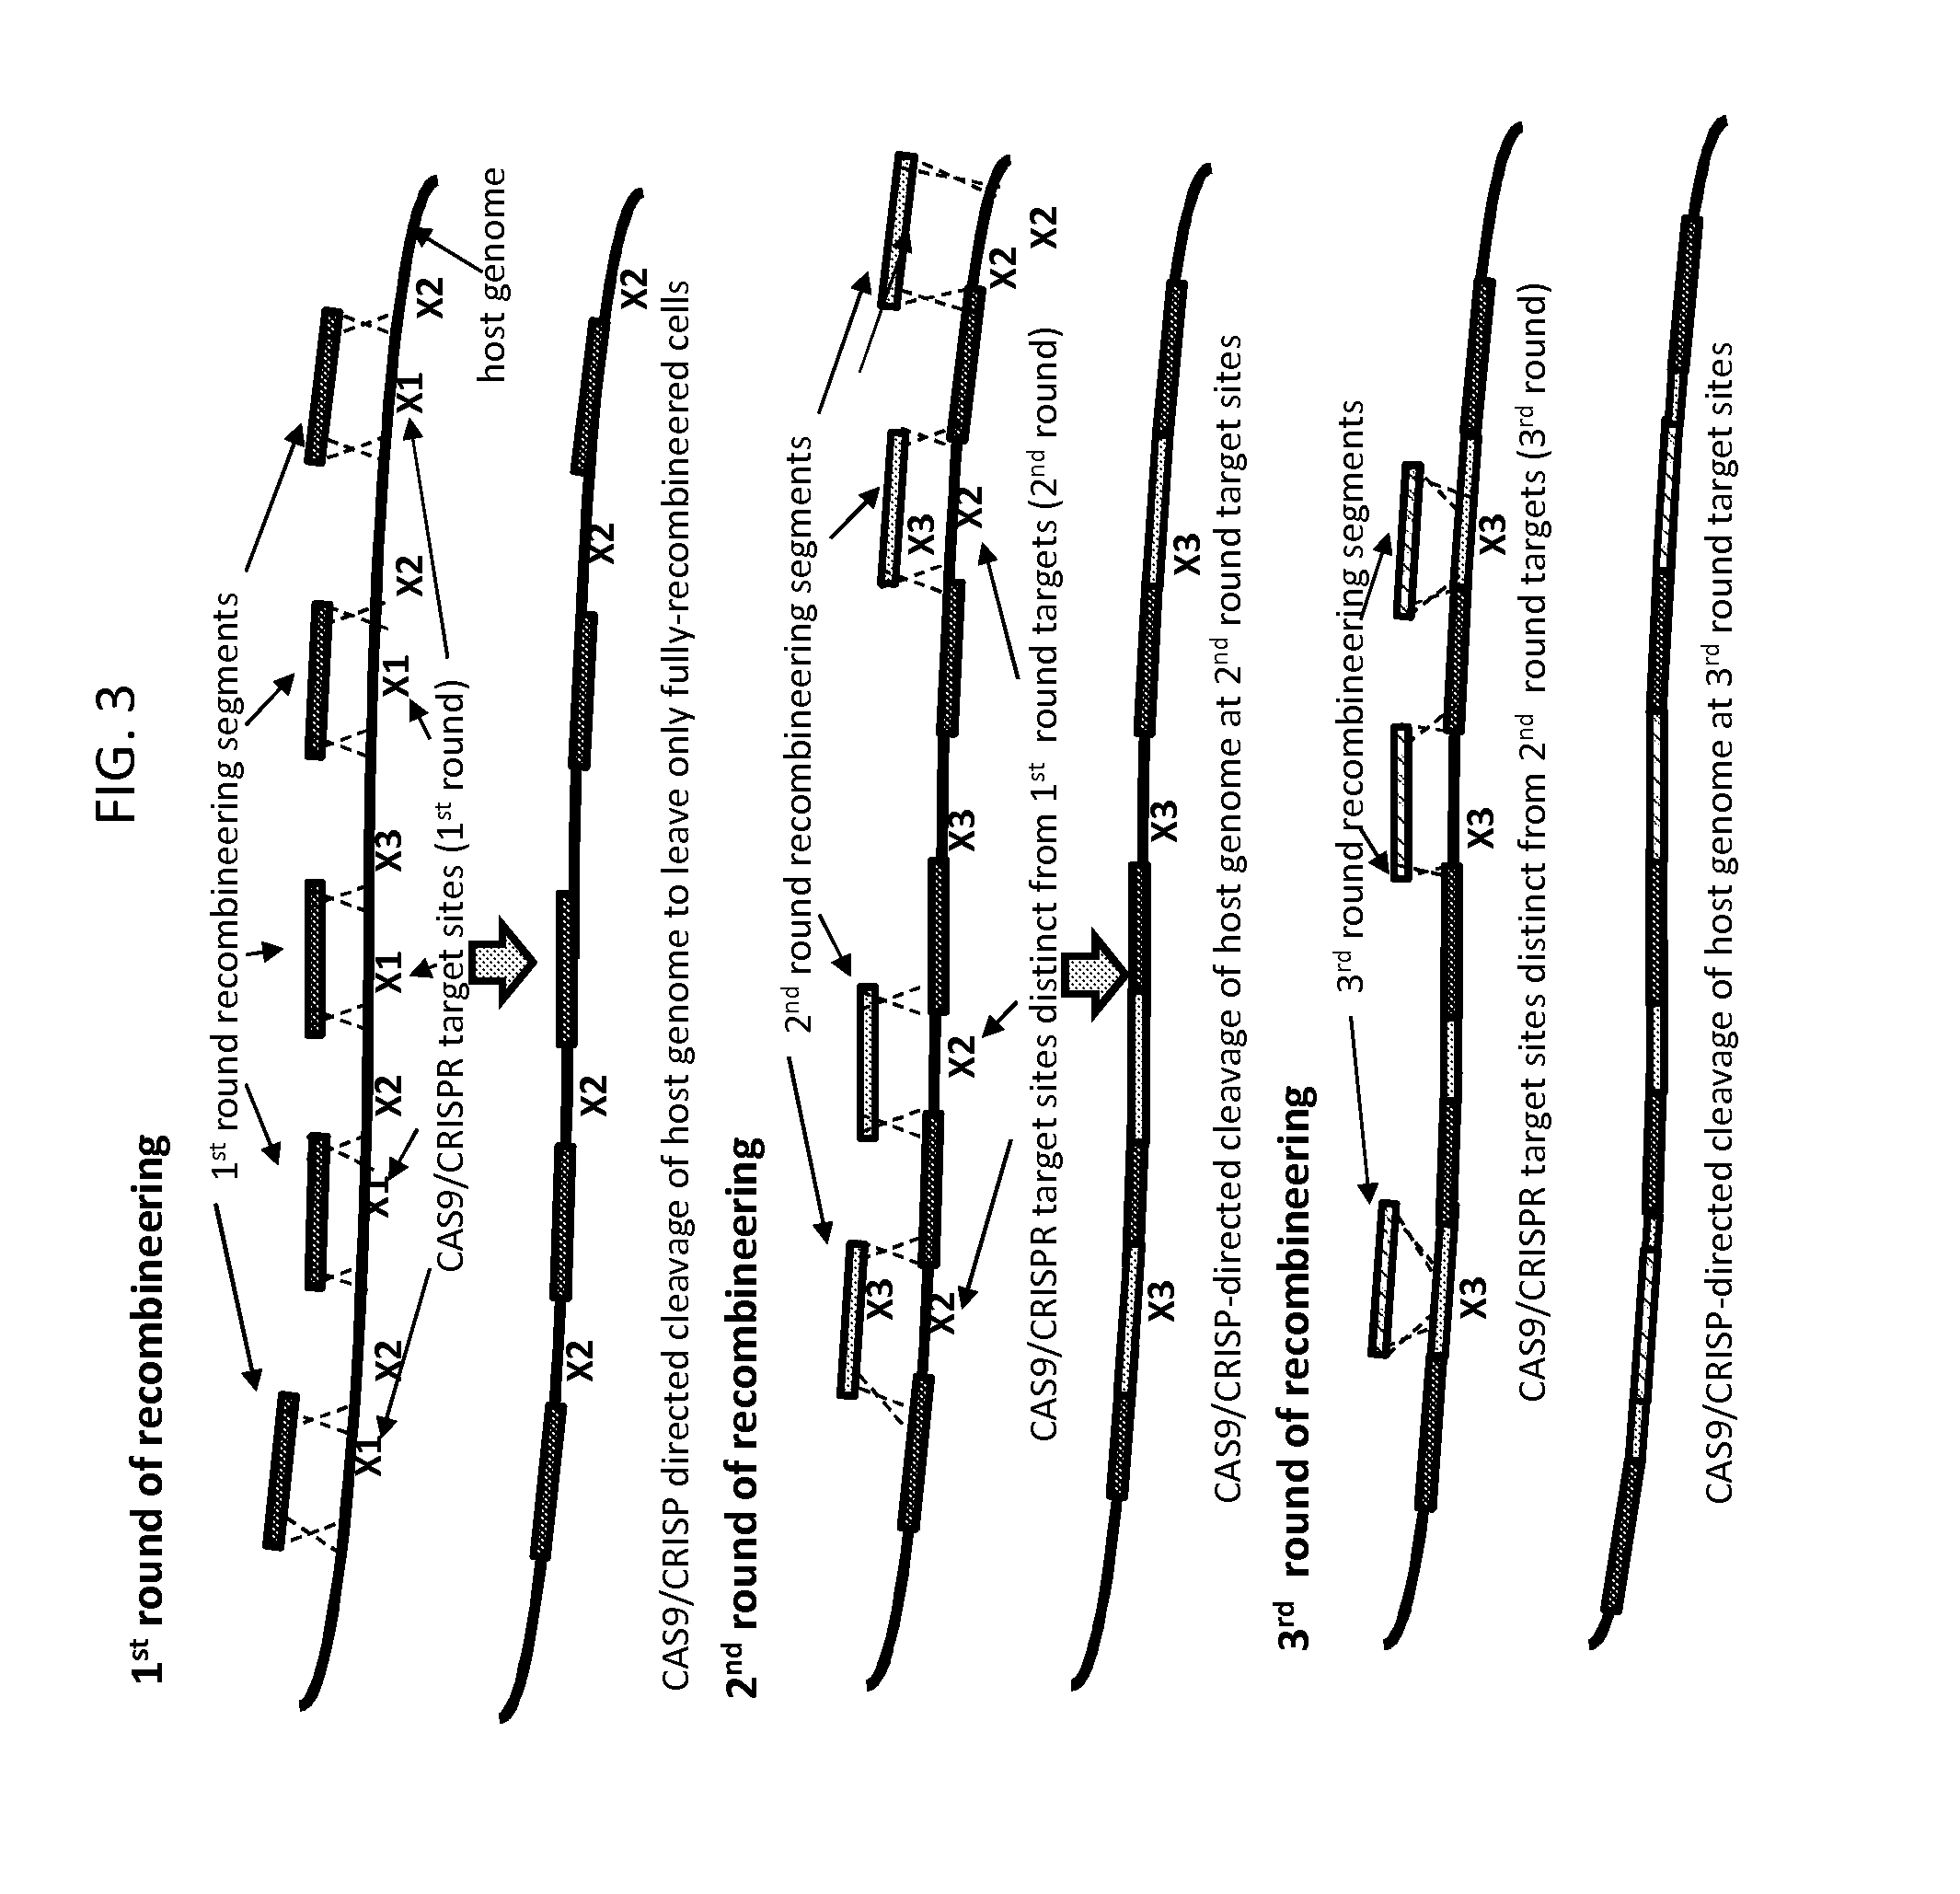 Methods of in vivo engineering of large sequences using multiple crispr/cas selections of recombineering events